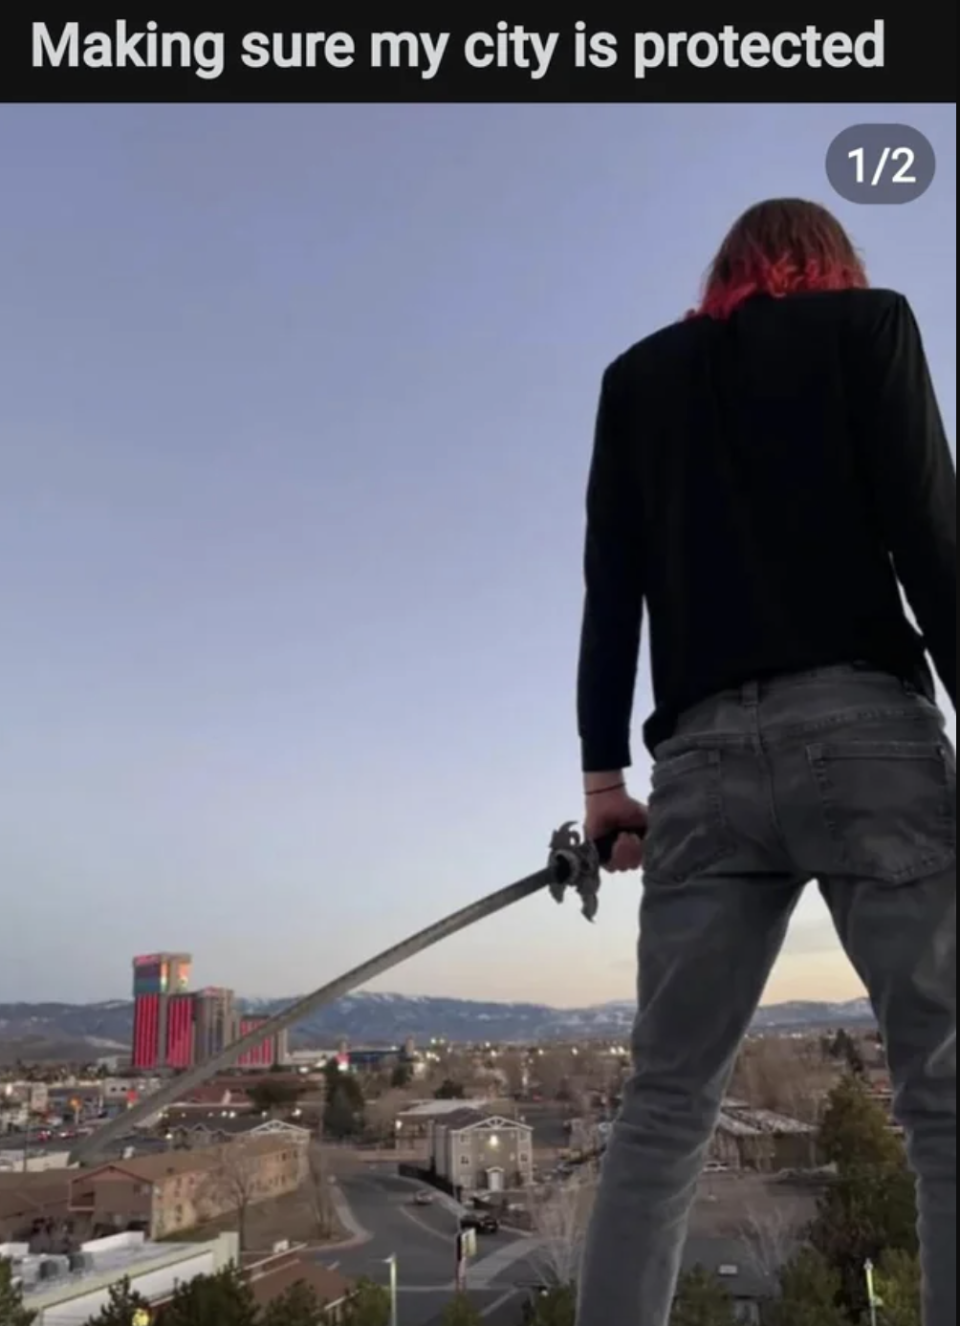 person standing with a sword with text, making sure my city is protected